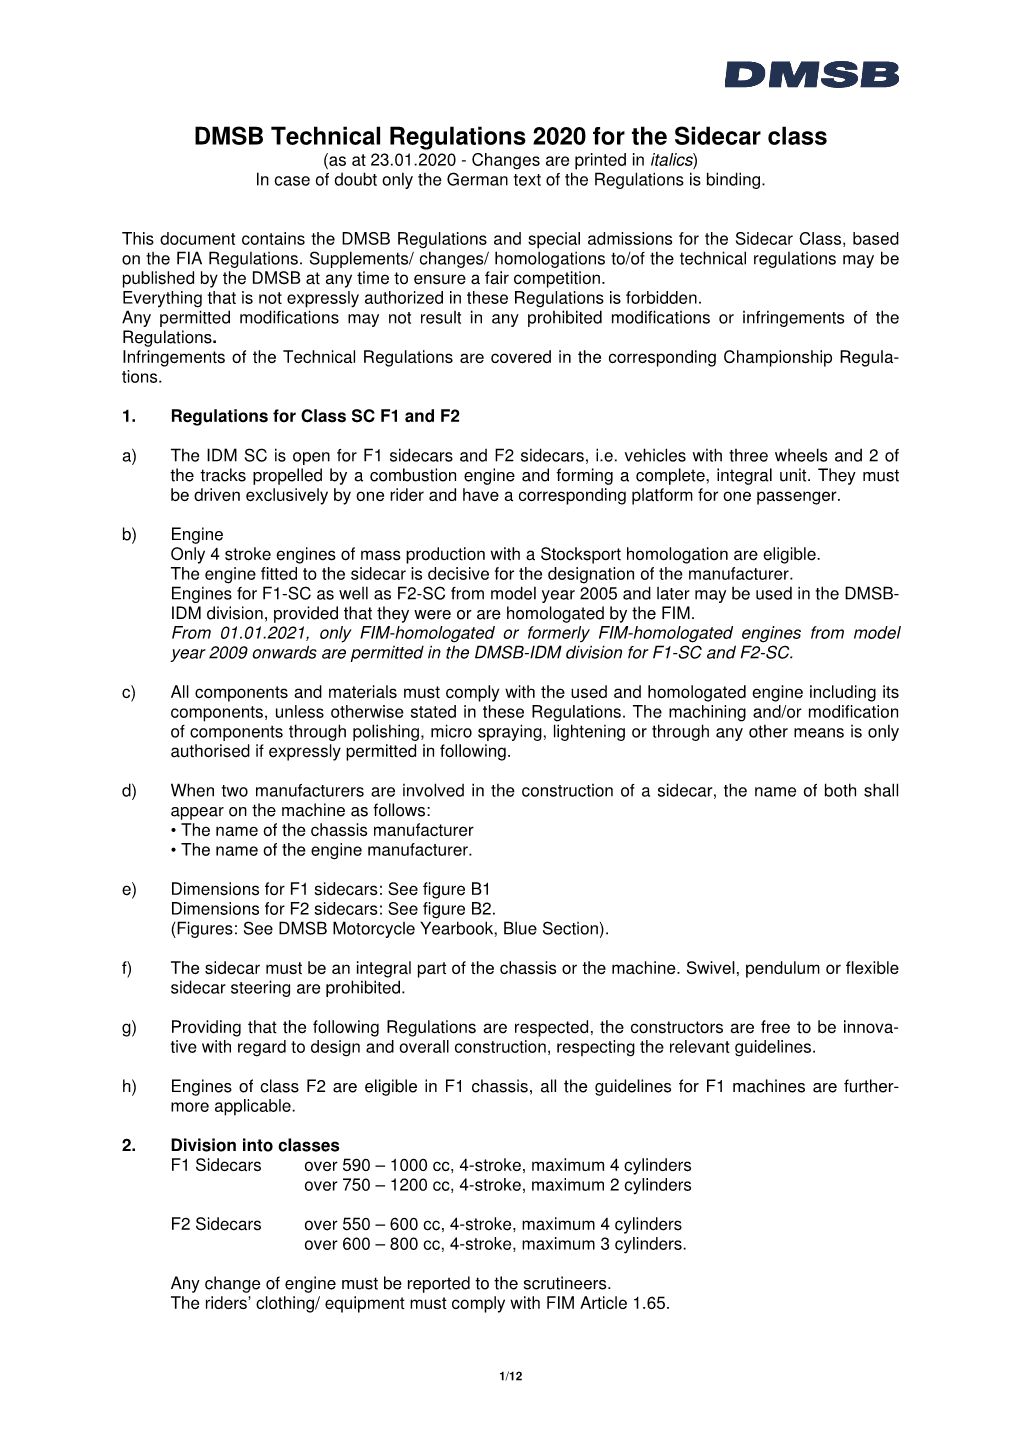 DMSB Technical Regulations 2020 for the Sidecar Class